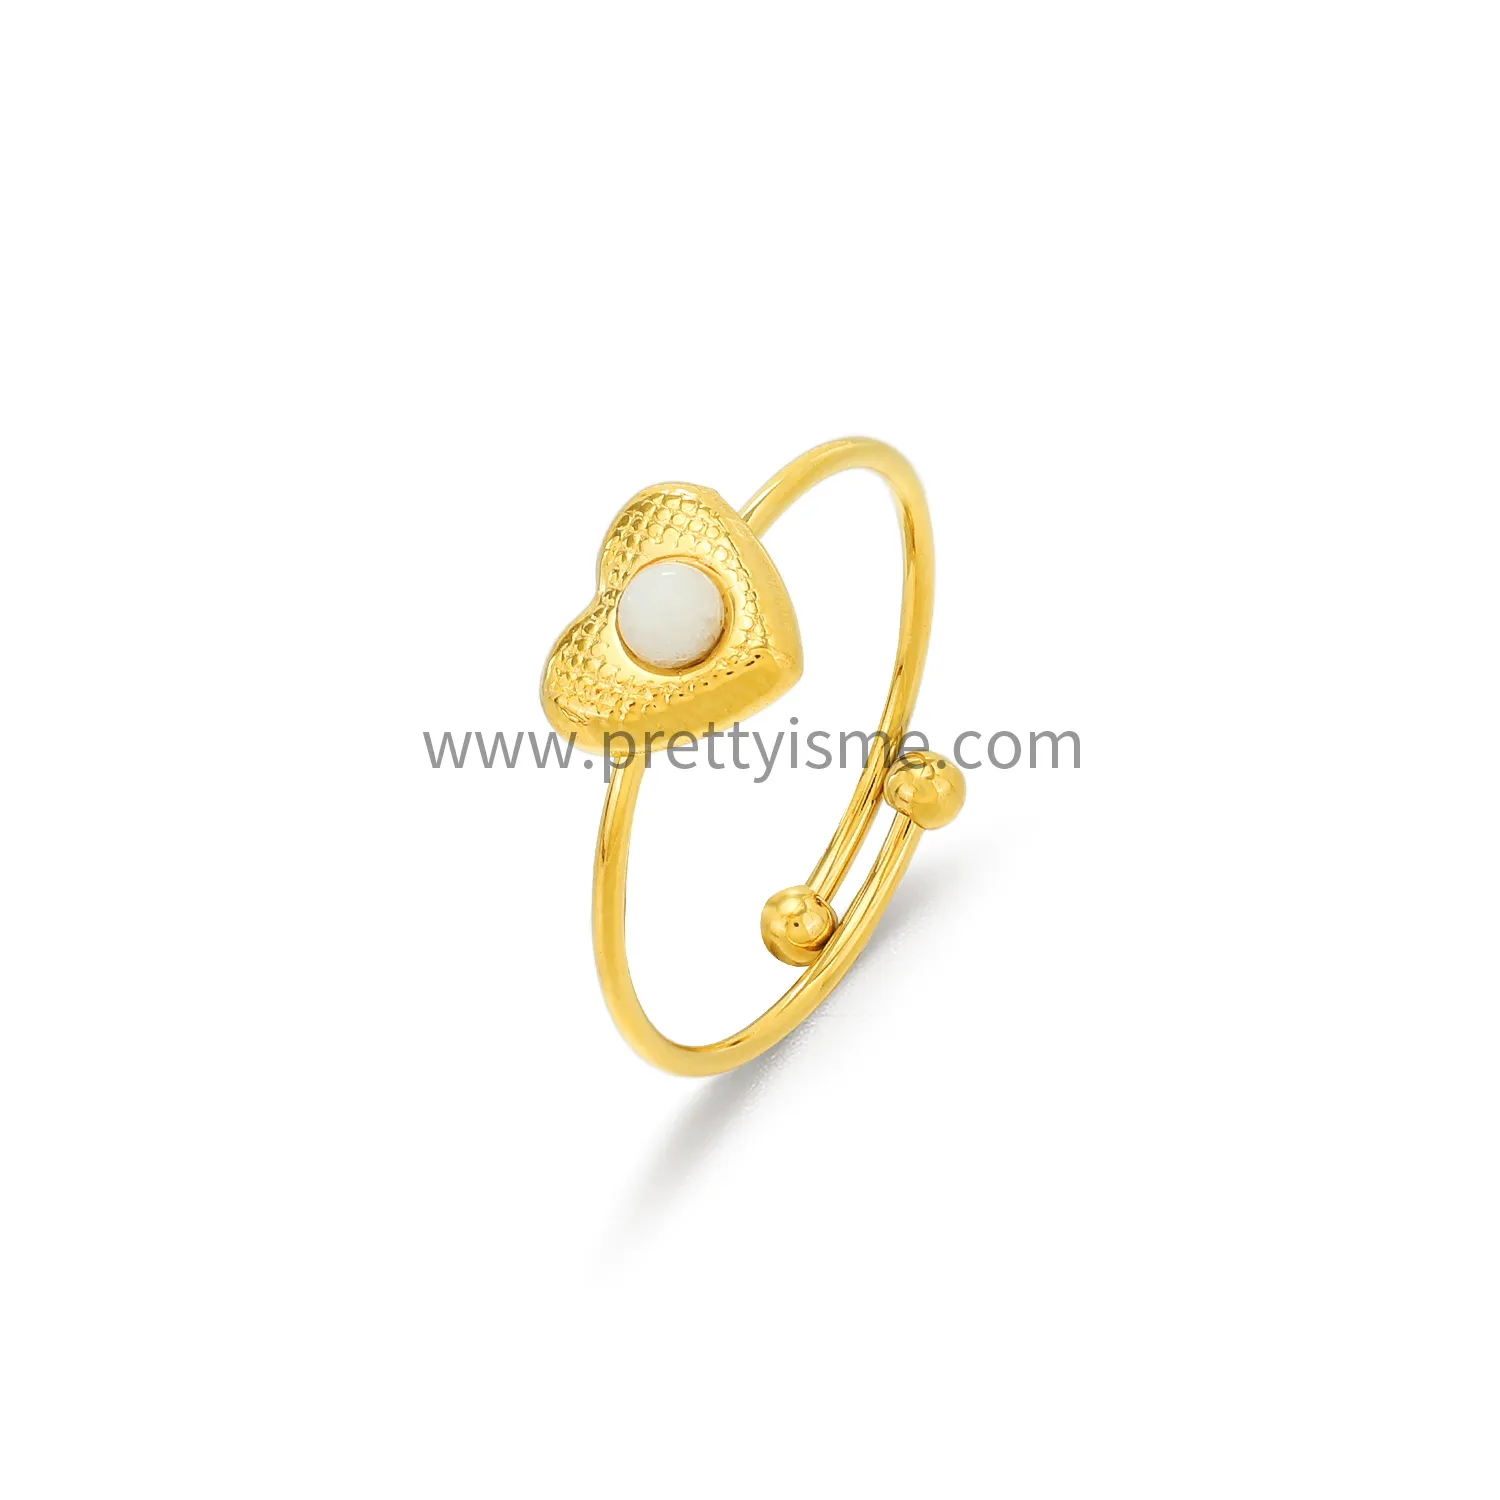 Lovely Stainless Steel Heart Ring in 18k Gold Plated Set with White Stones Open Ring (5).webp